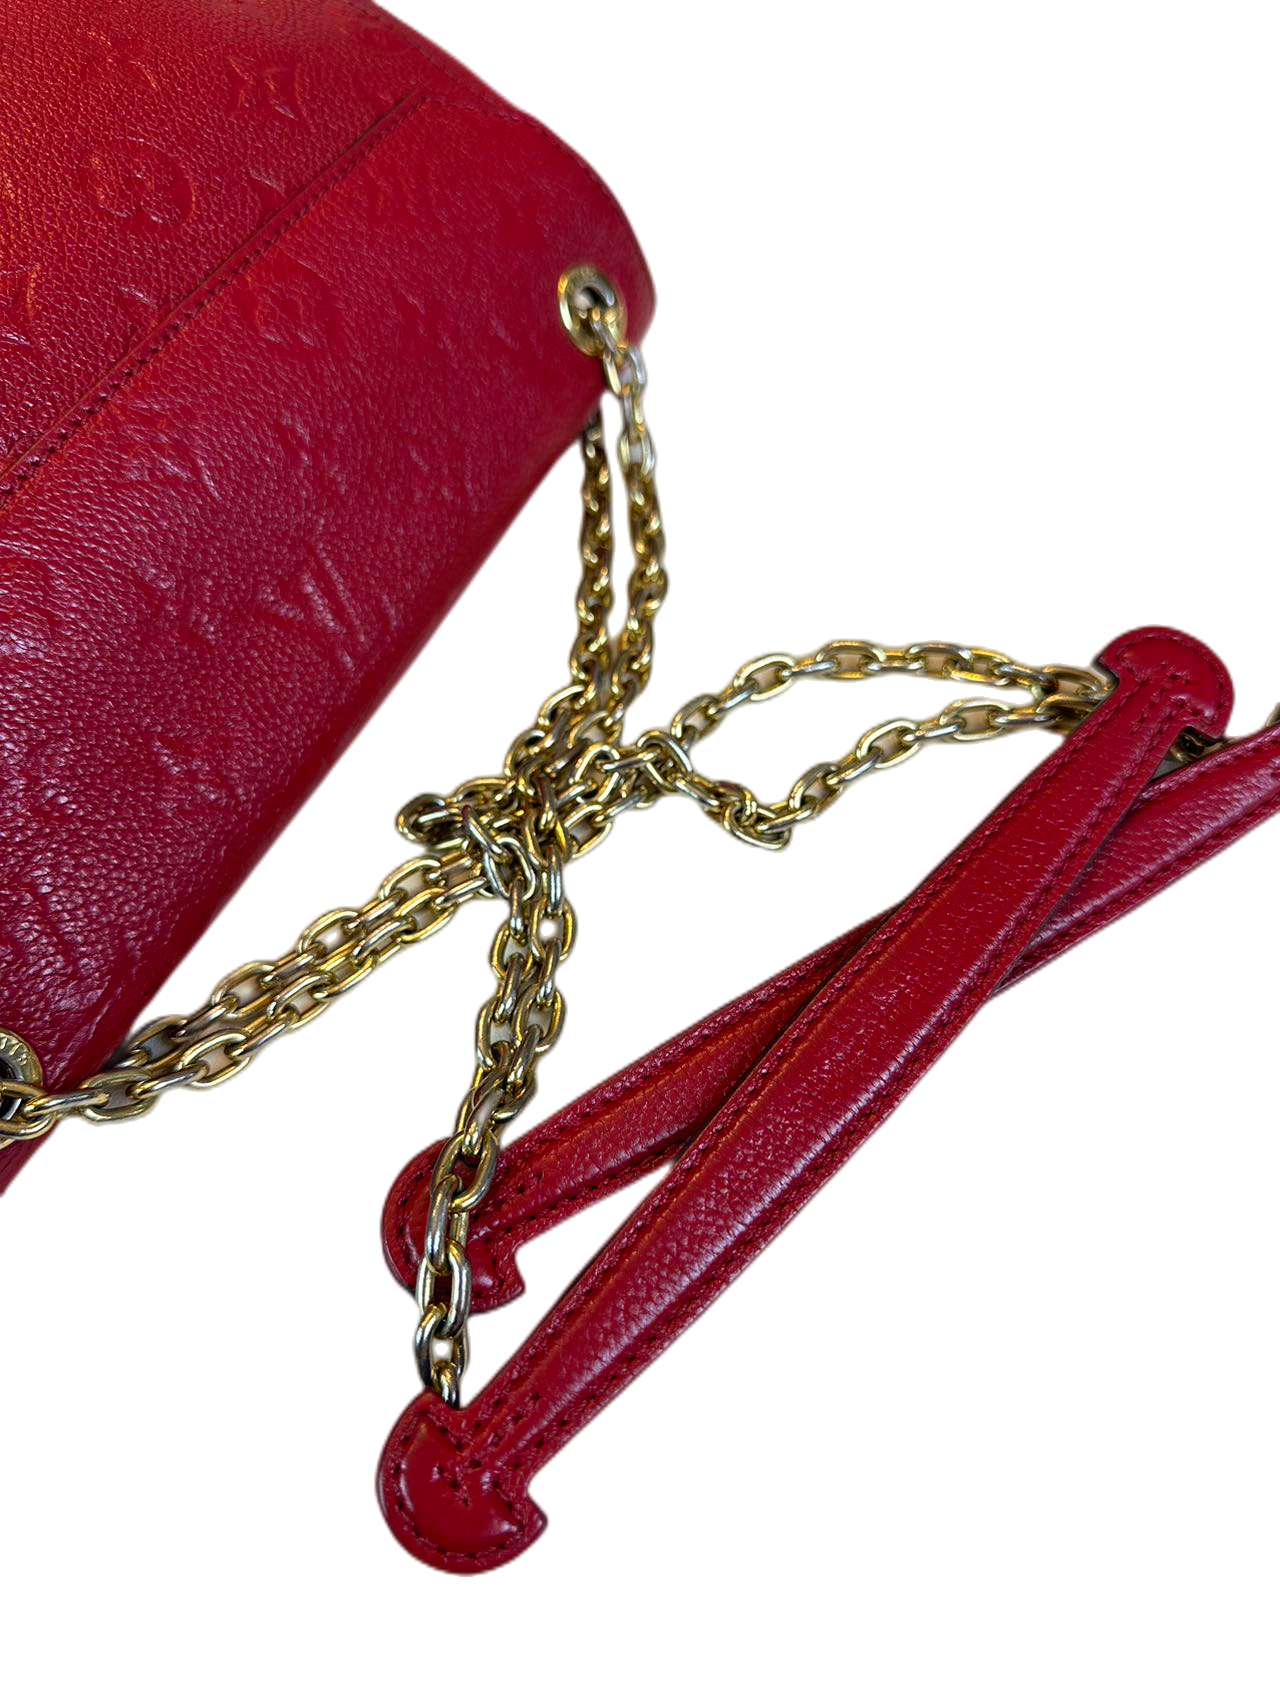 Preloved Louis Vuitton Monogram Red Leather Chain Shoulder Bag